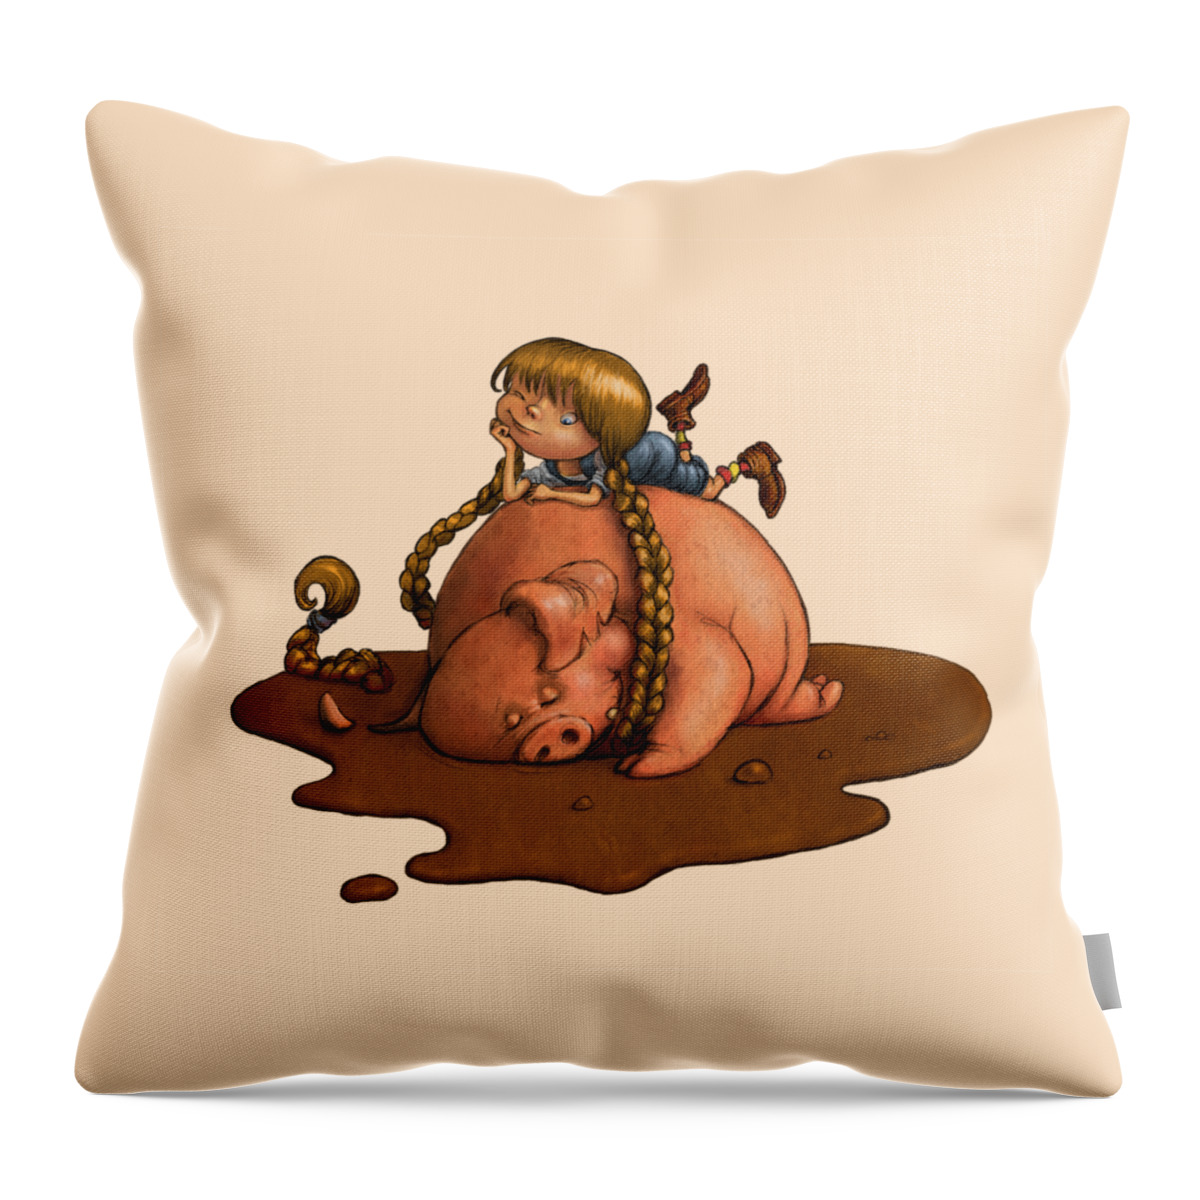 Pig Throw Pillow featuring the digital art Pig Tales by Andy Catling